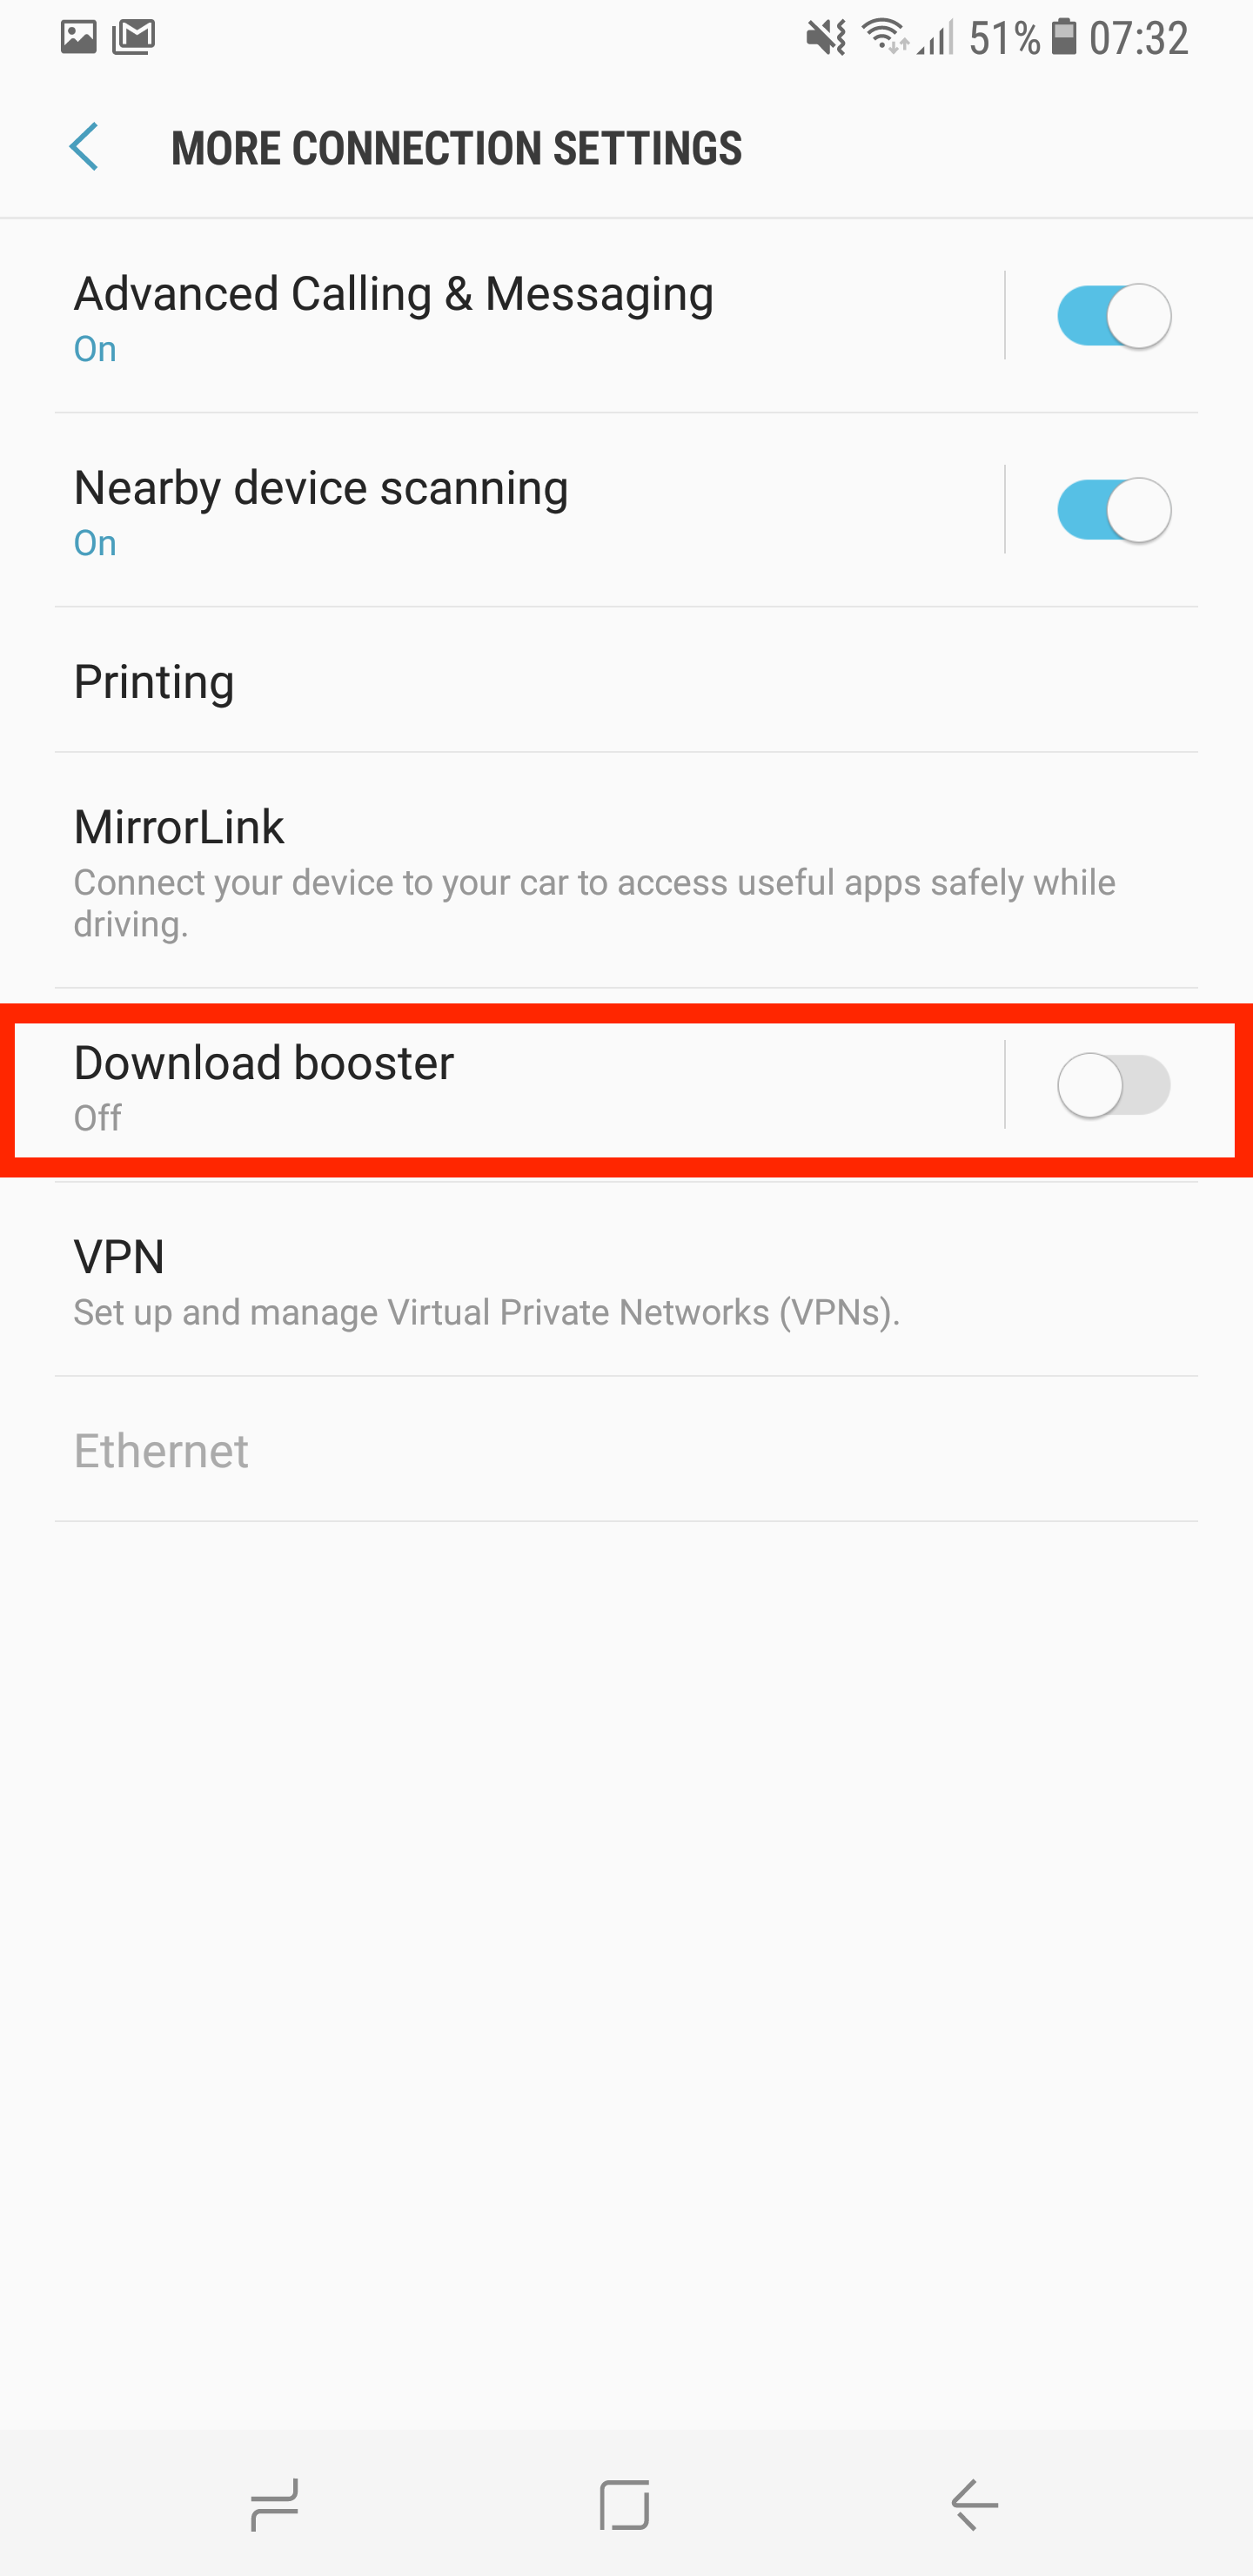 How to turn on Download Booster in Samsung Galaxy J7 Prime